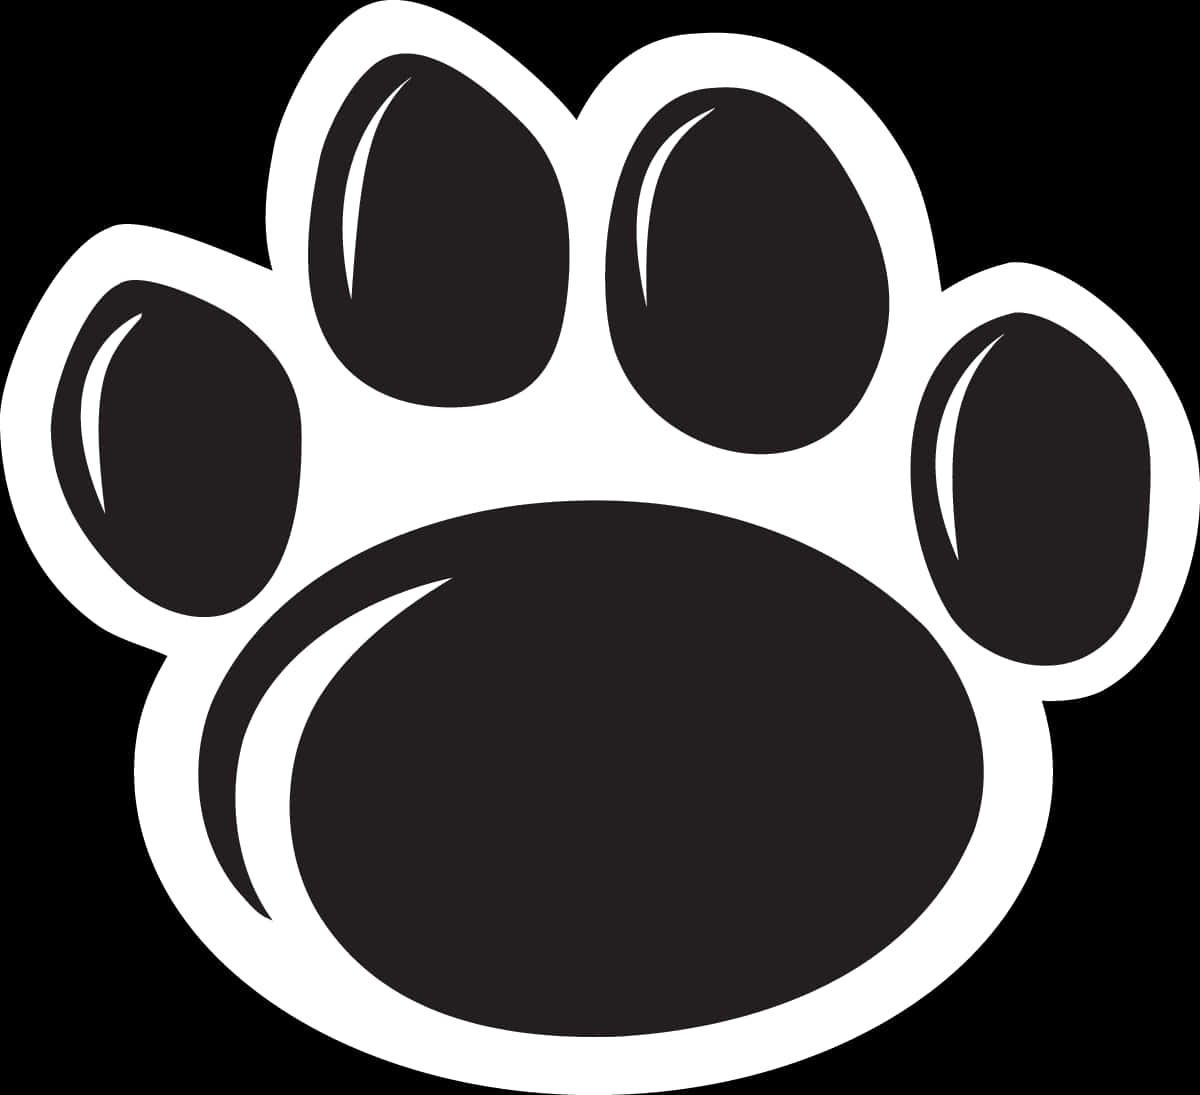 Blackand White Paw Print Graphic PNG